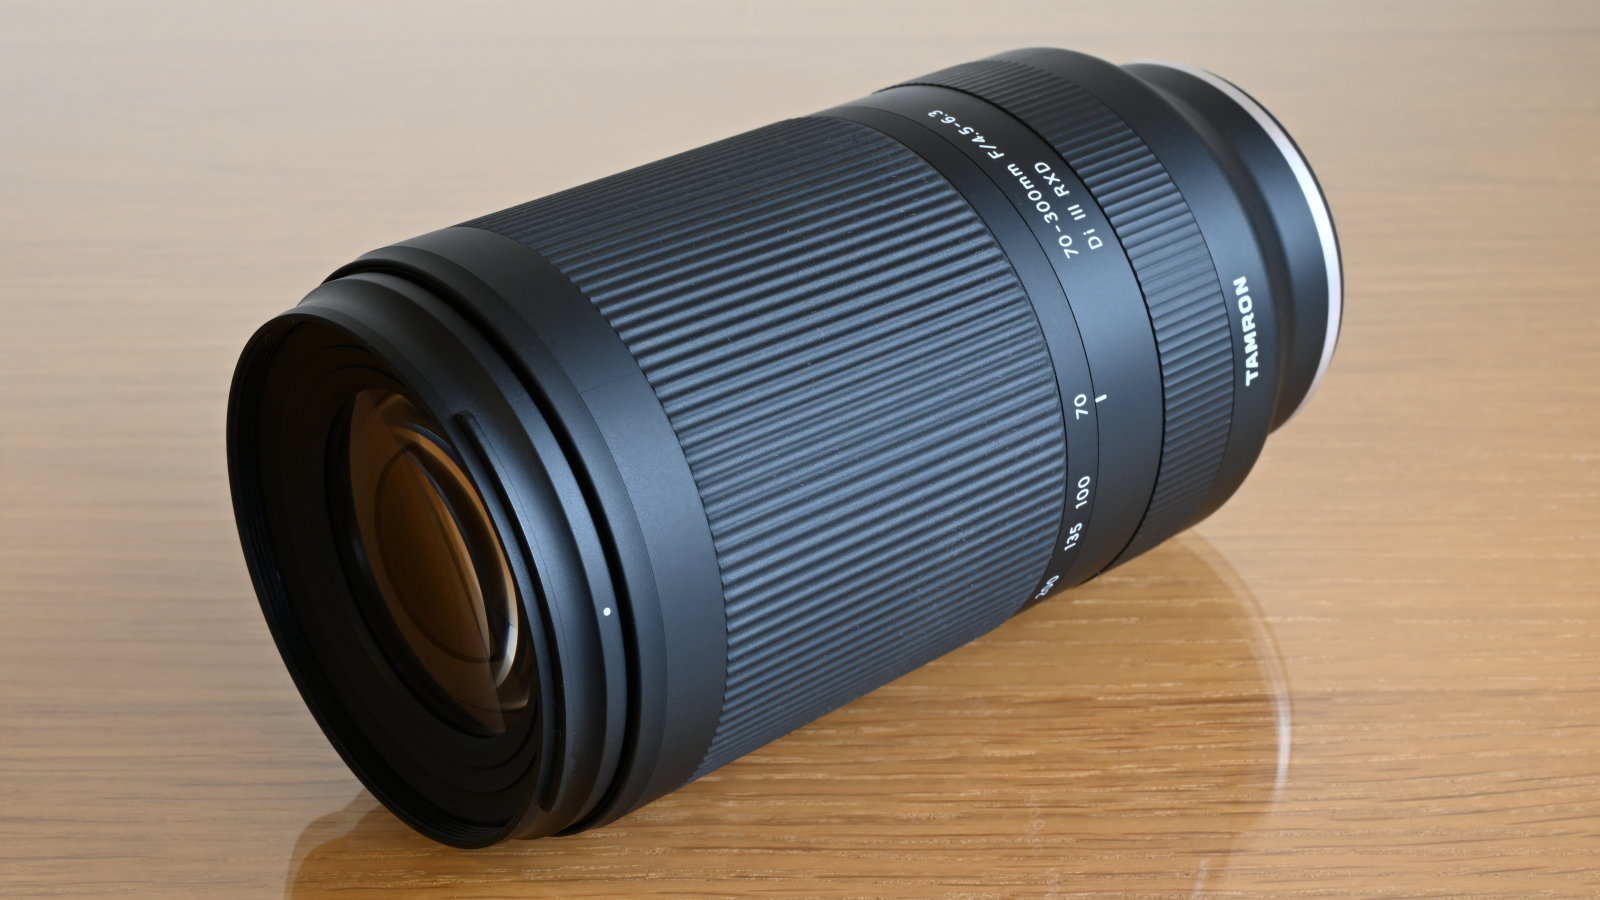 Tamron 70-300mm F/4.5-6.3 Di III RXD review